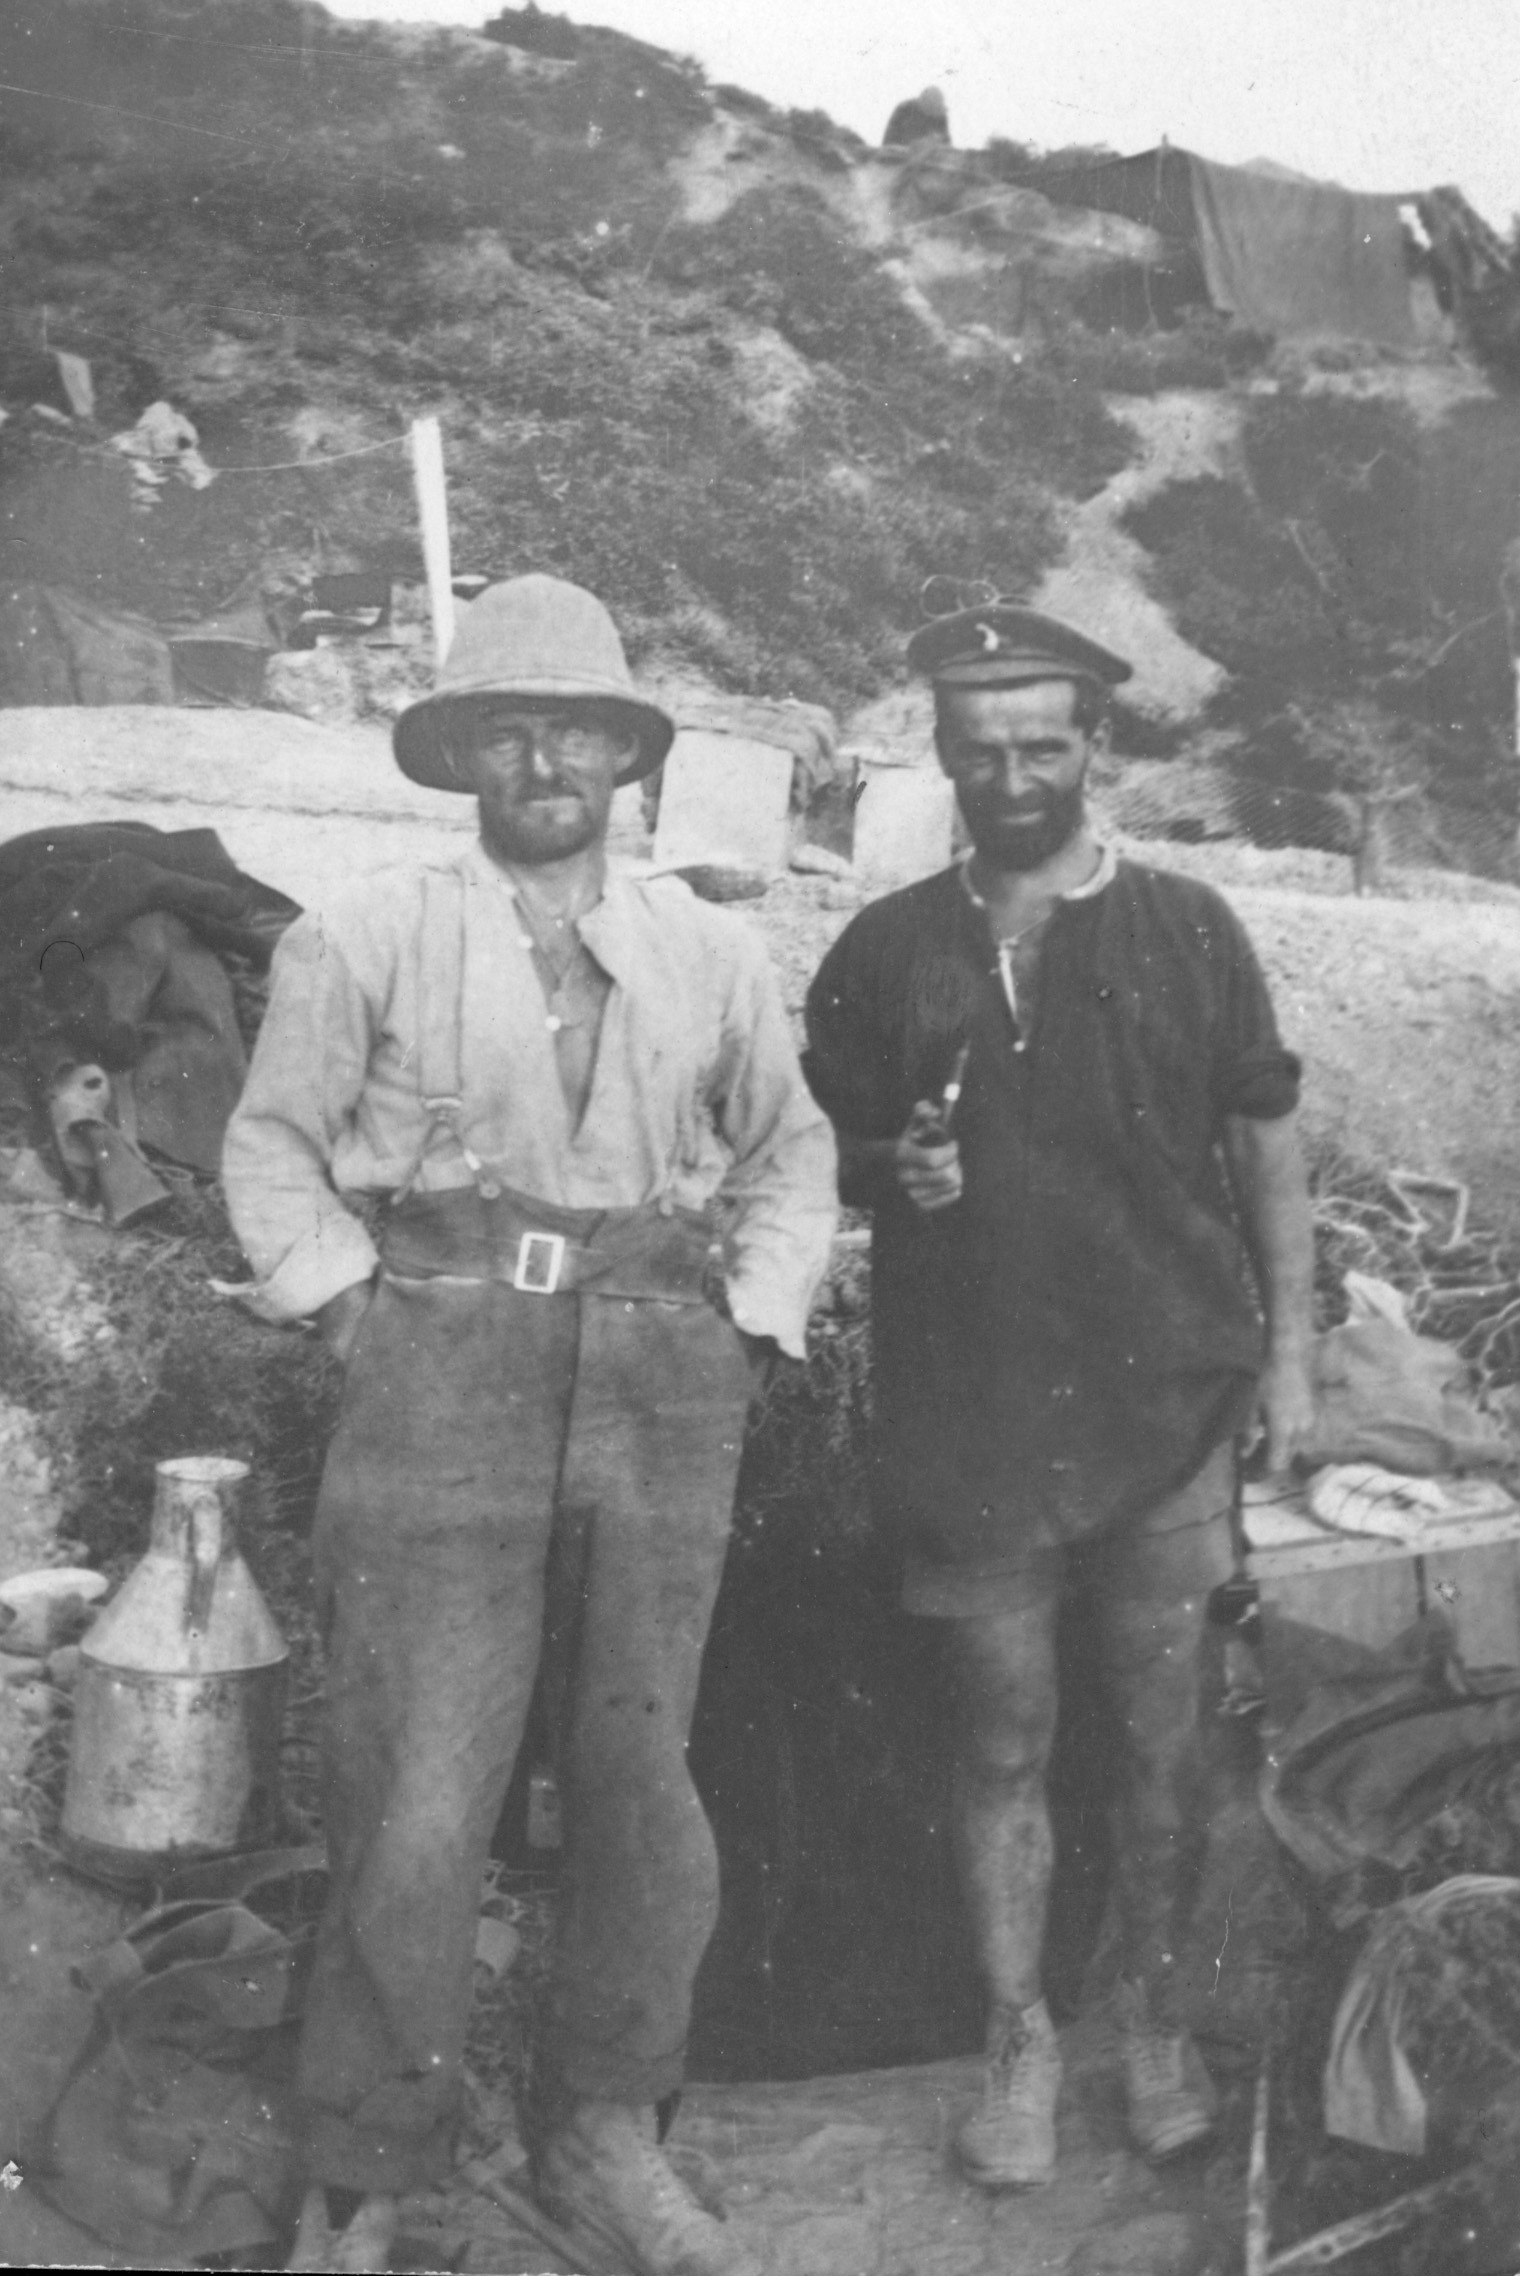 Rupert Pyle (left) and Frank Pyle (right) outside their bivouac at Gallipoli